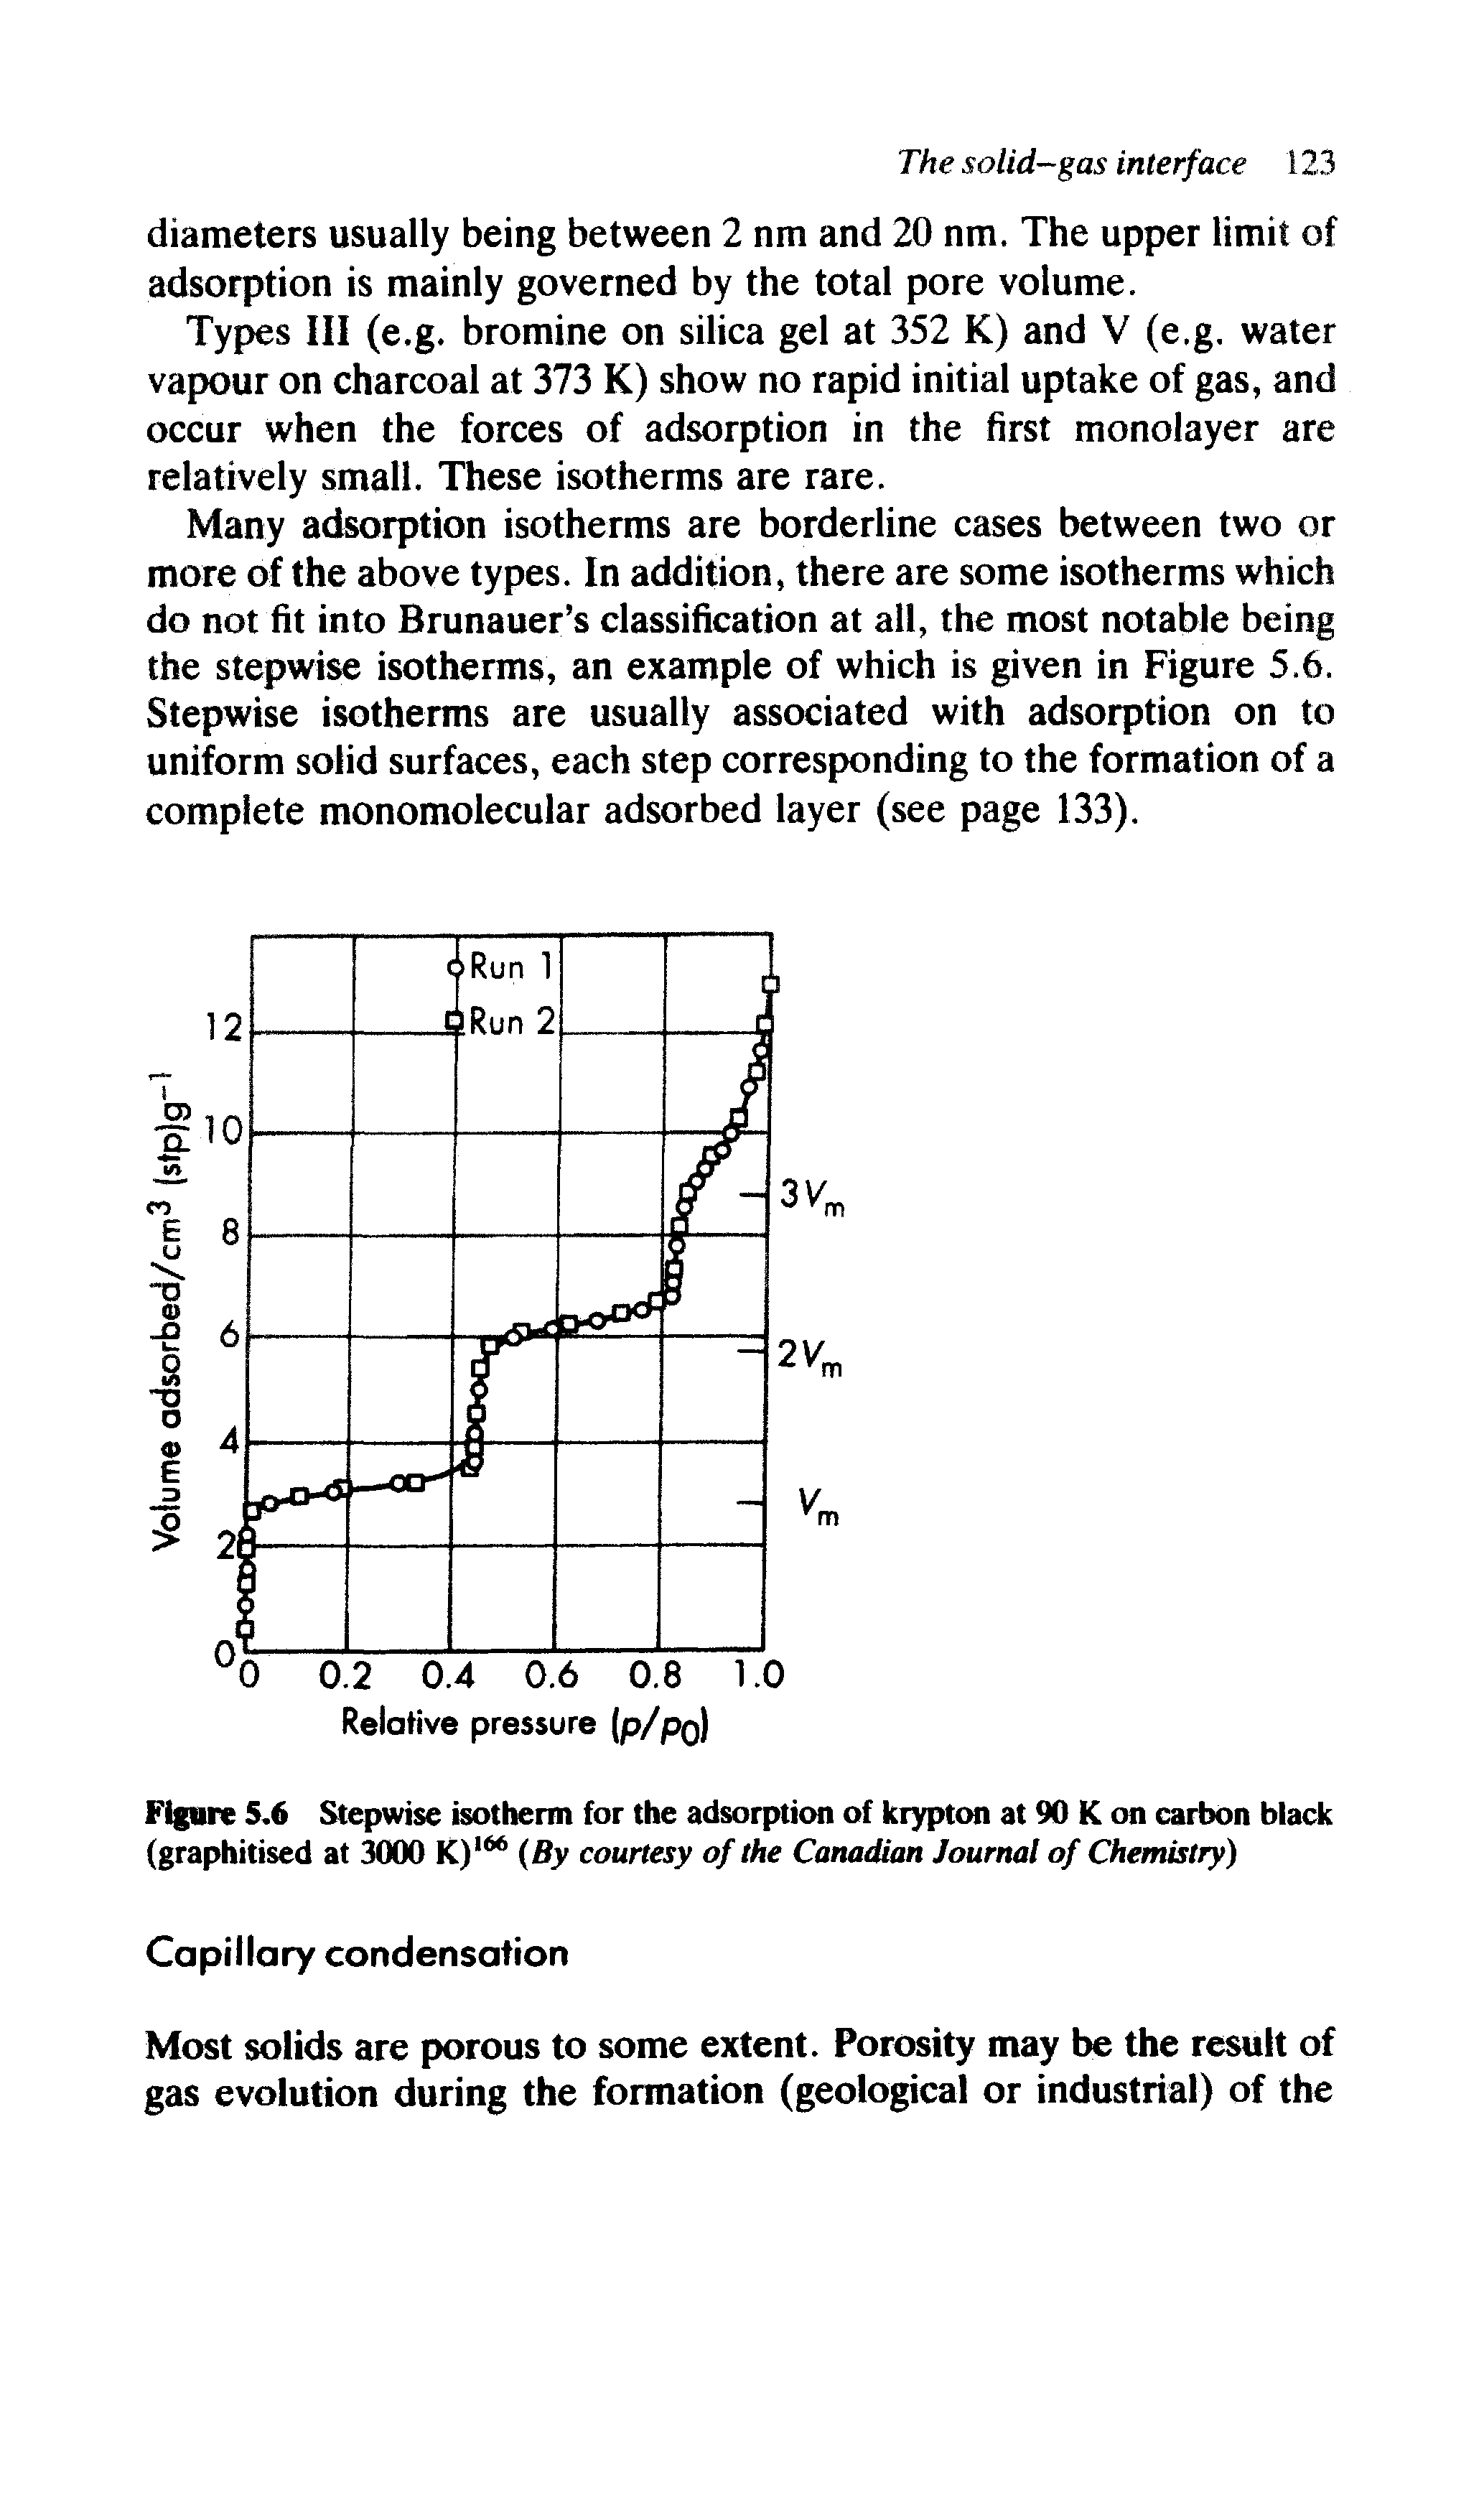 Figure 5.6 Stepwise isotherm for the adsorption of krypton at 90 K on carbon black (graphitised at 3000 K)166 (By courtesy of the Canadian Journal of Chemistry)...